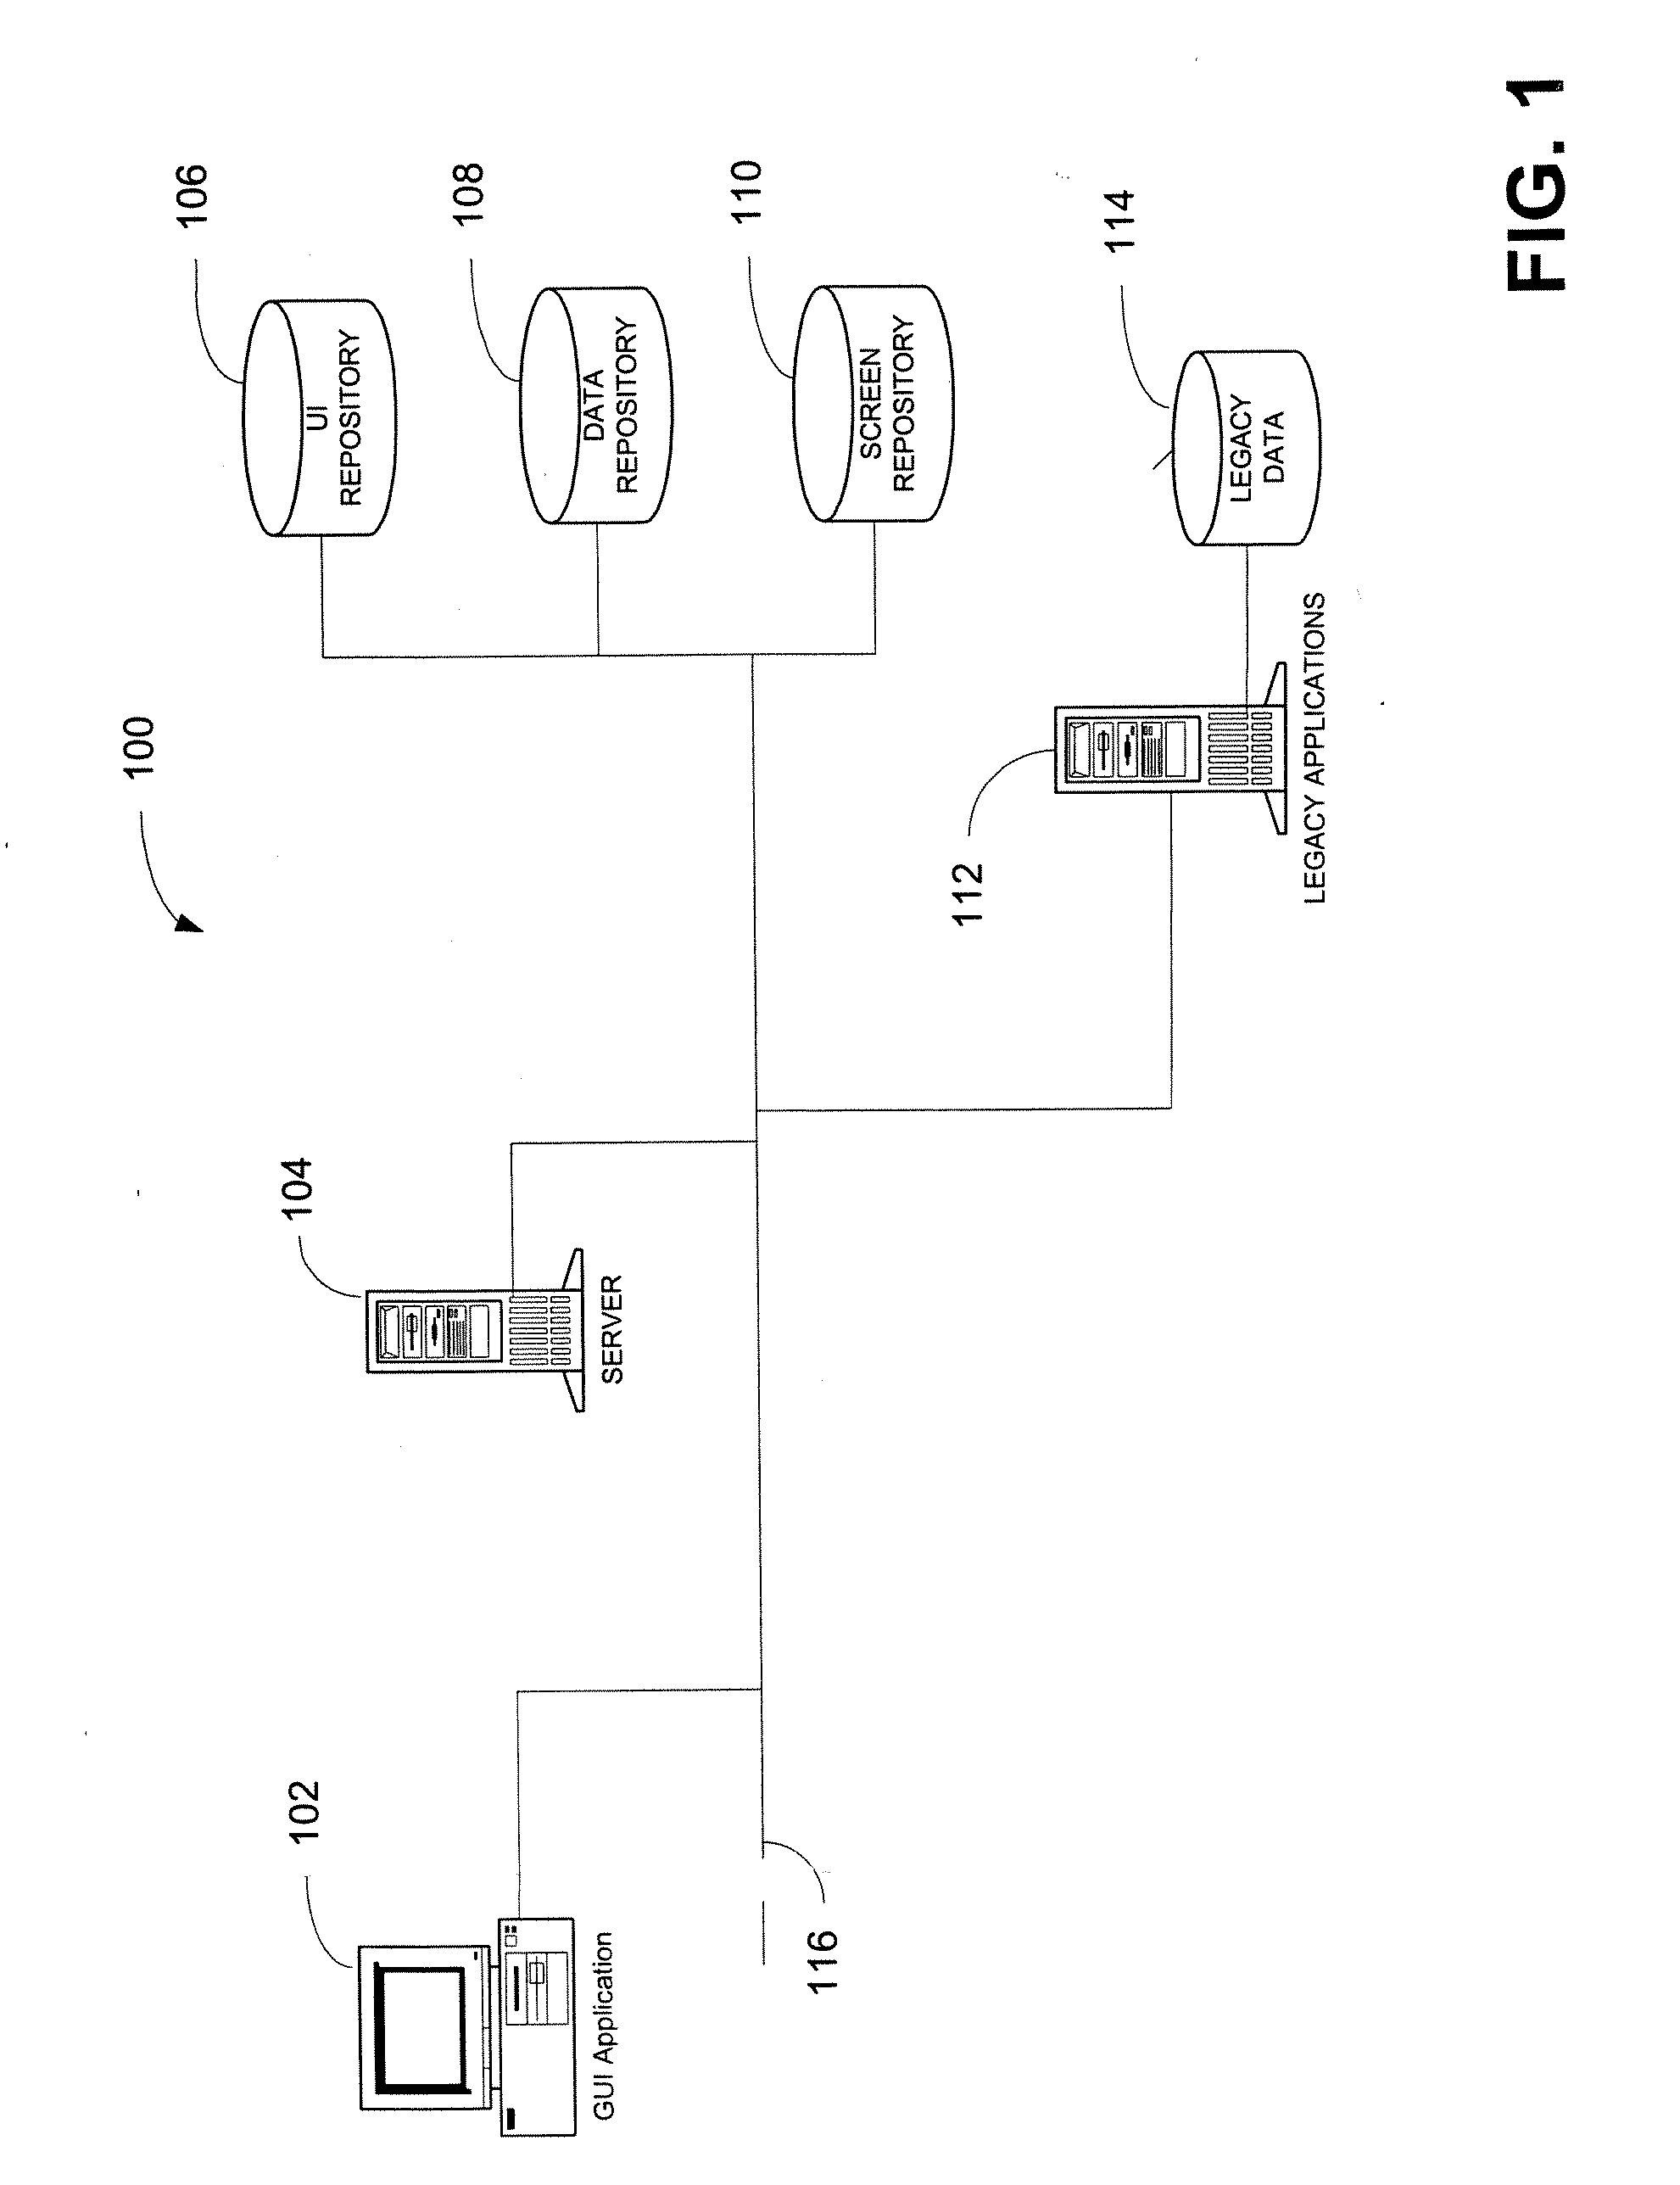 Method and apparatus for providing integrated management of point-of-sale and accounts receivable